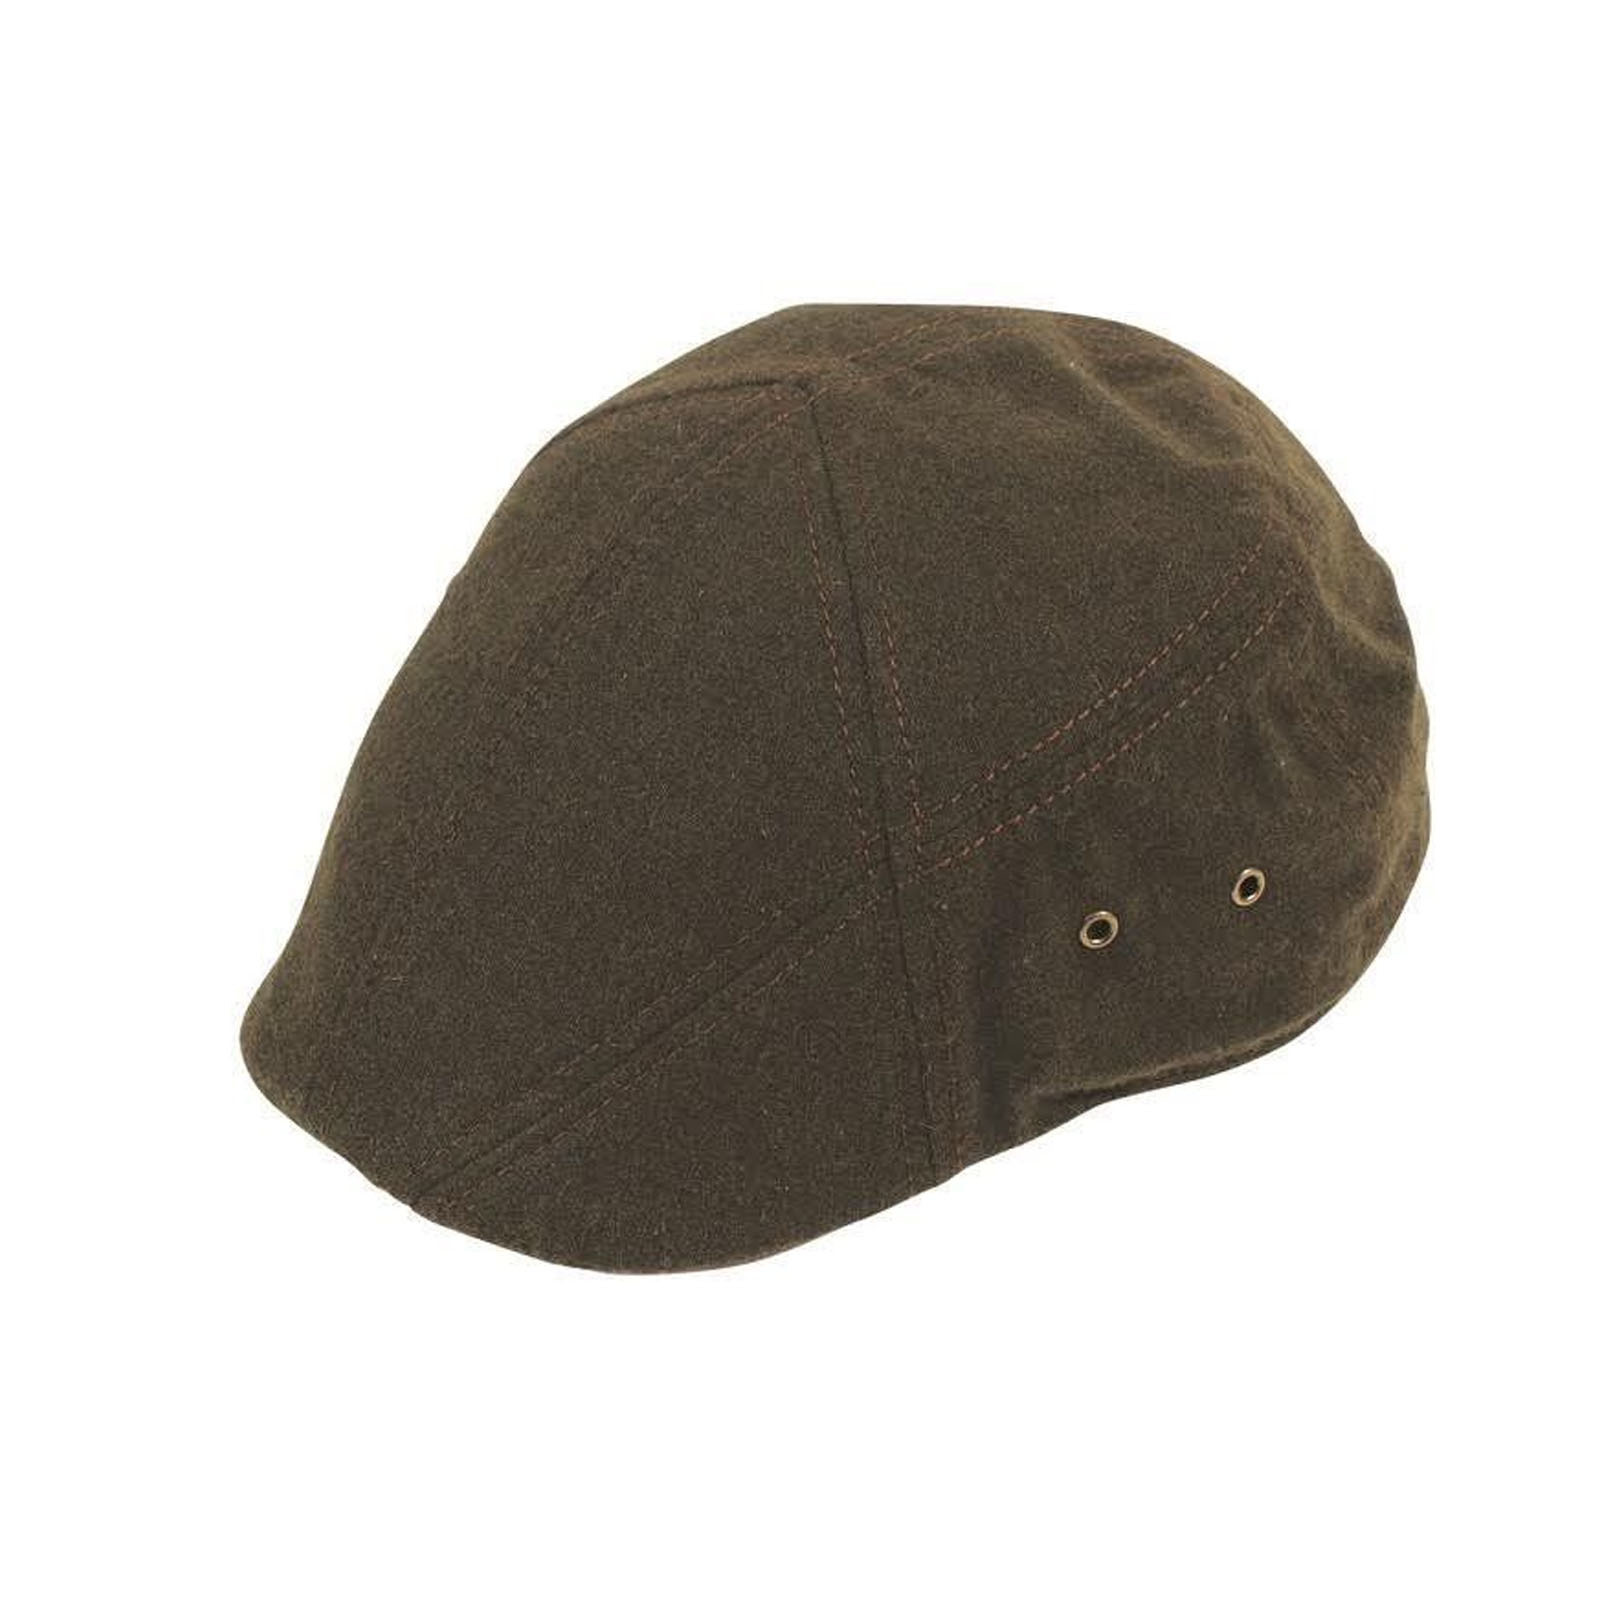 GOORIN BROTHERS Union Square Wool Ivy Driving Hat 103-6023 Warm Flat ...